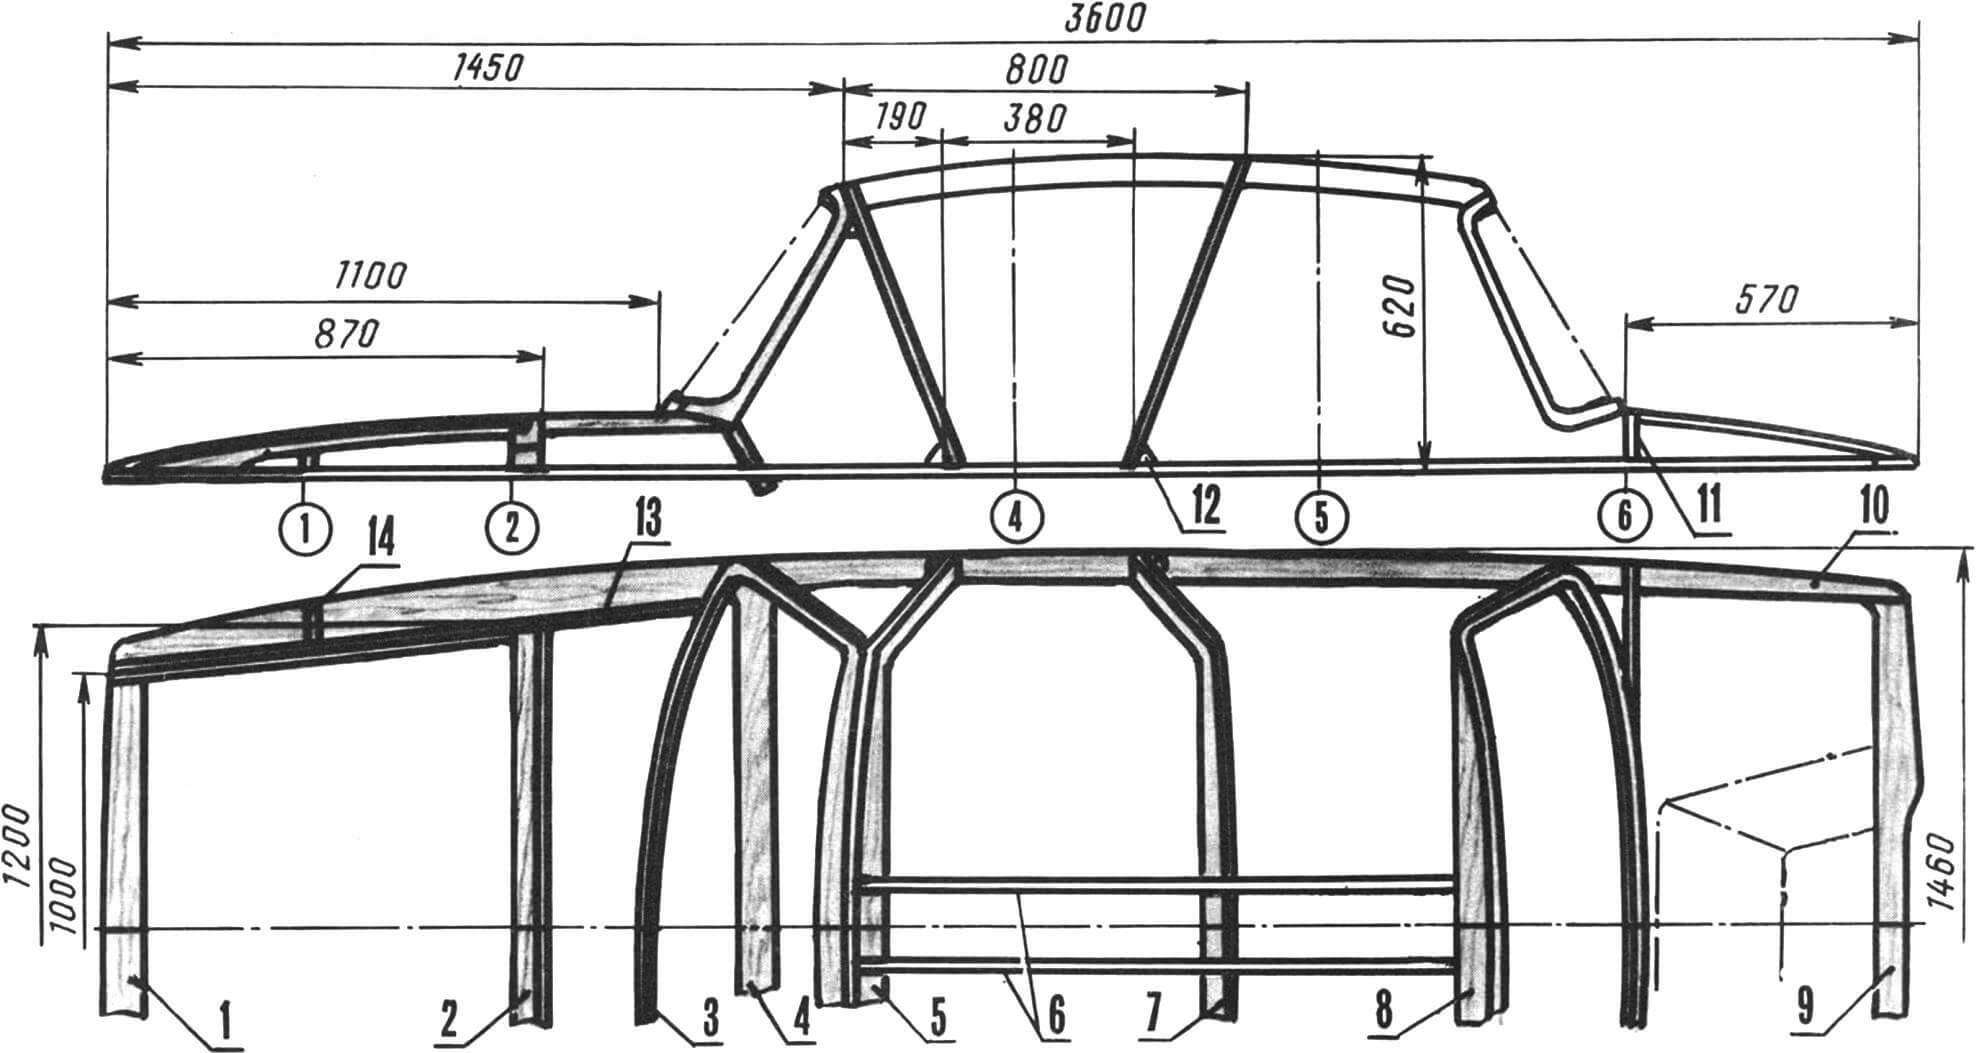 Fig. 3. Frame of the upper part of the boat's hull